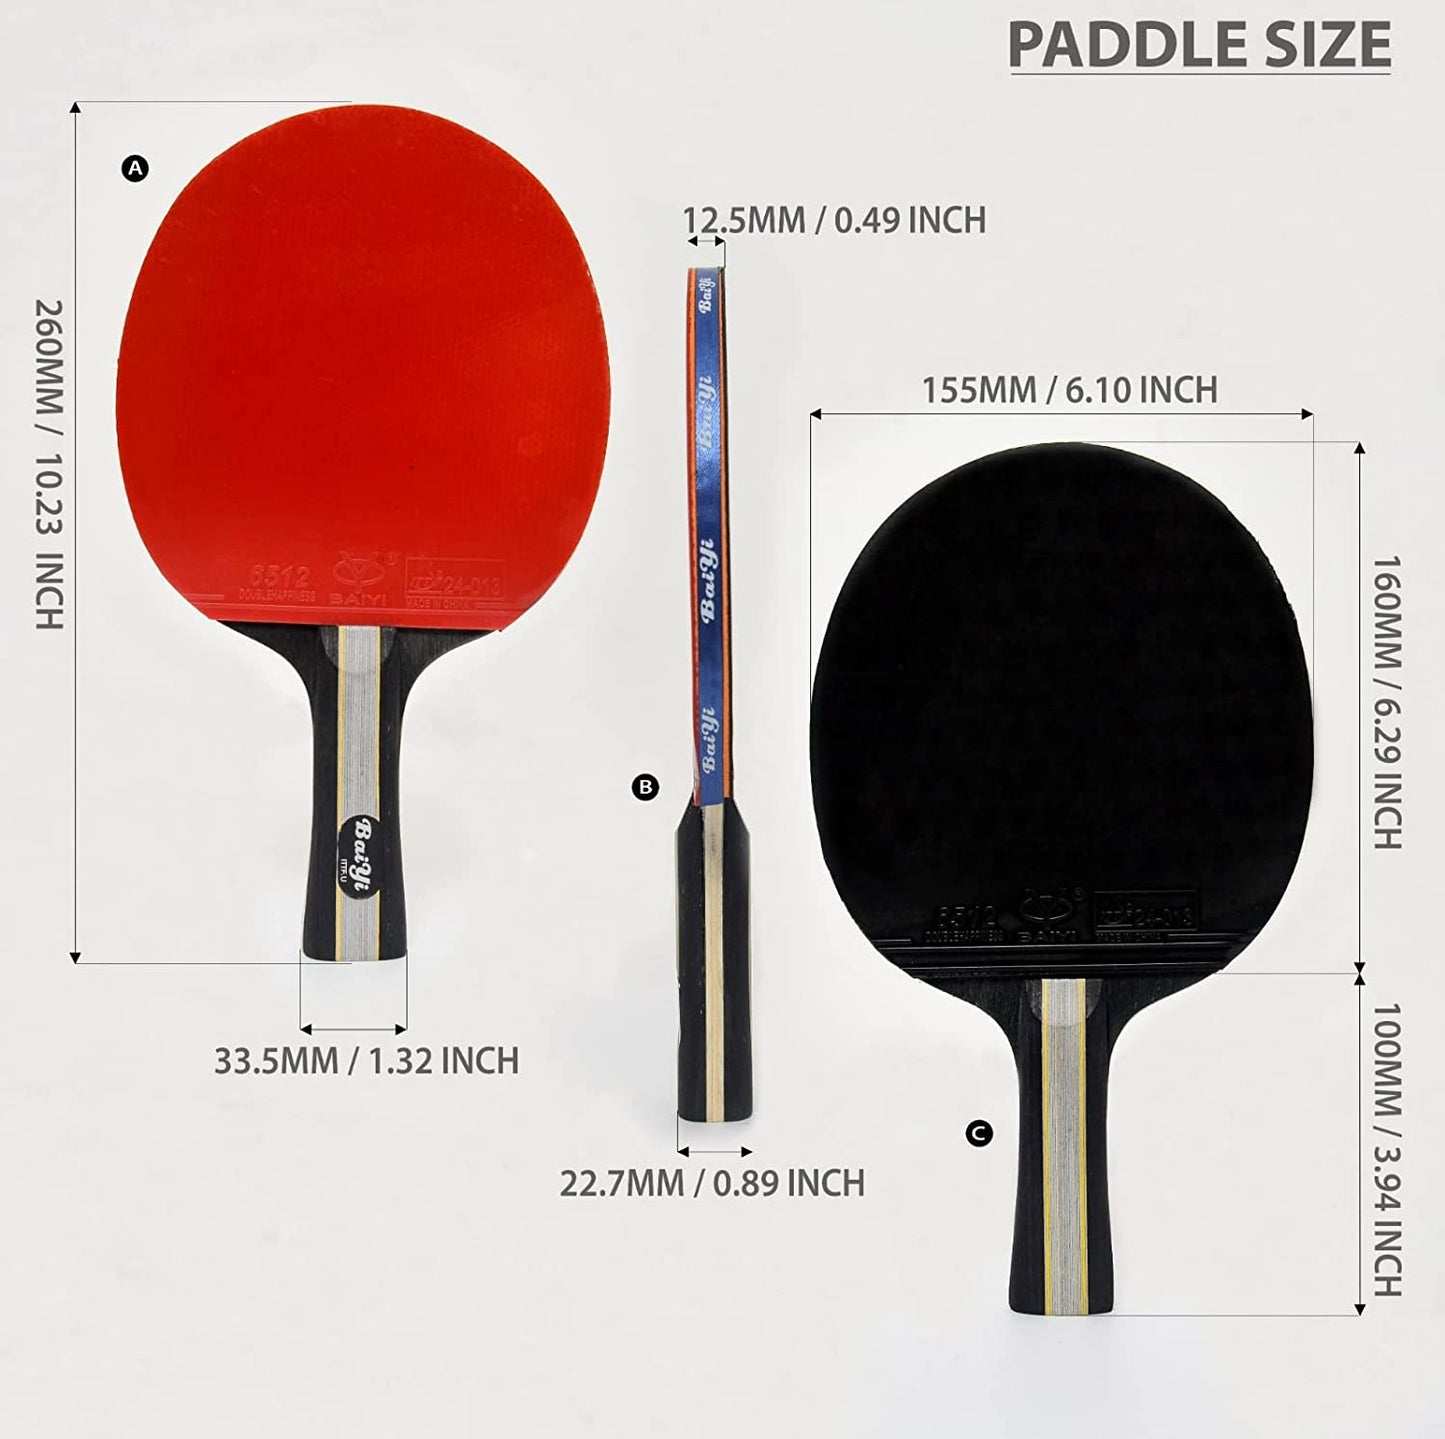 SKY LAND Sports Table Tennis Racket Set 2.0 | 2 Ping Pong Rackets, 3 balls & Case, Professional EM-9355 - COOL BABY